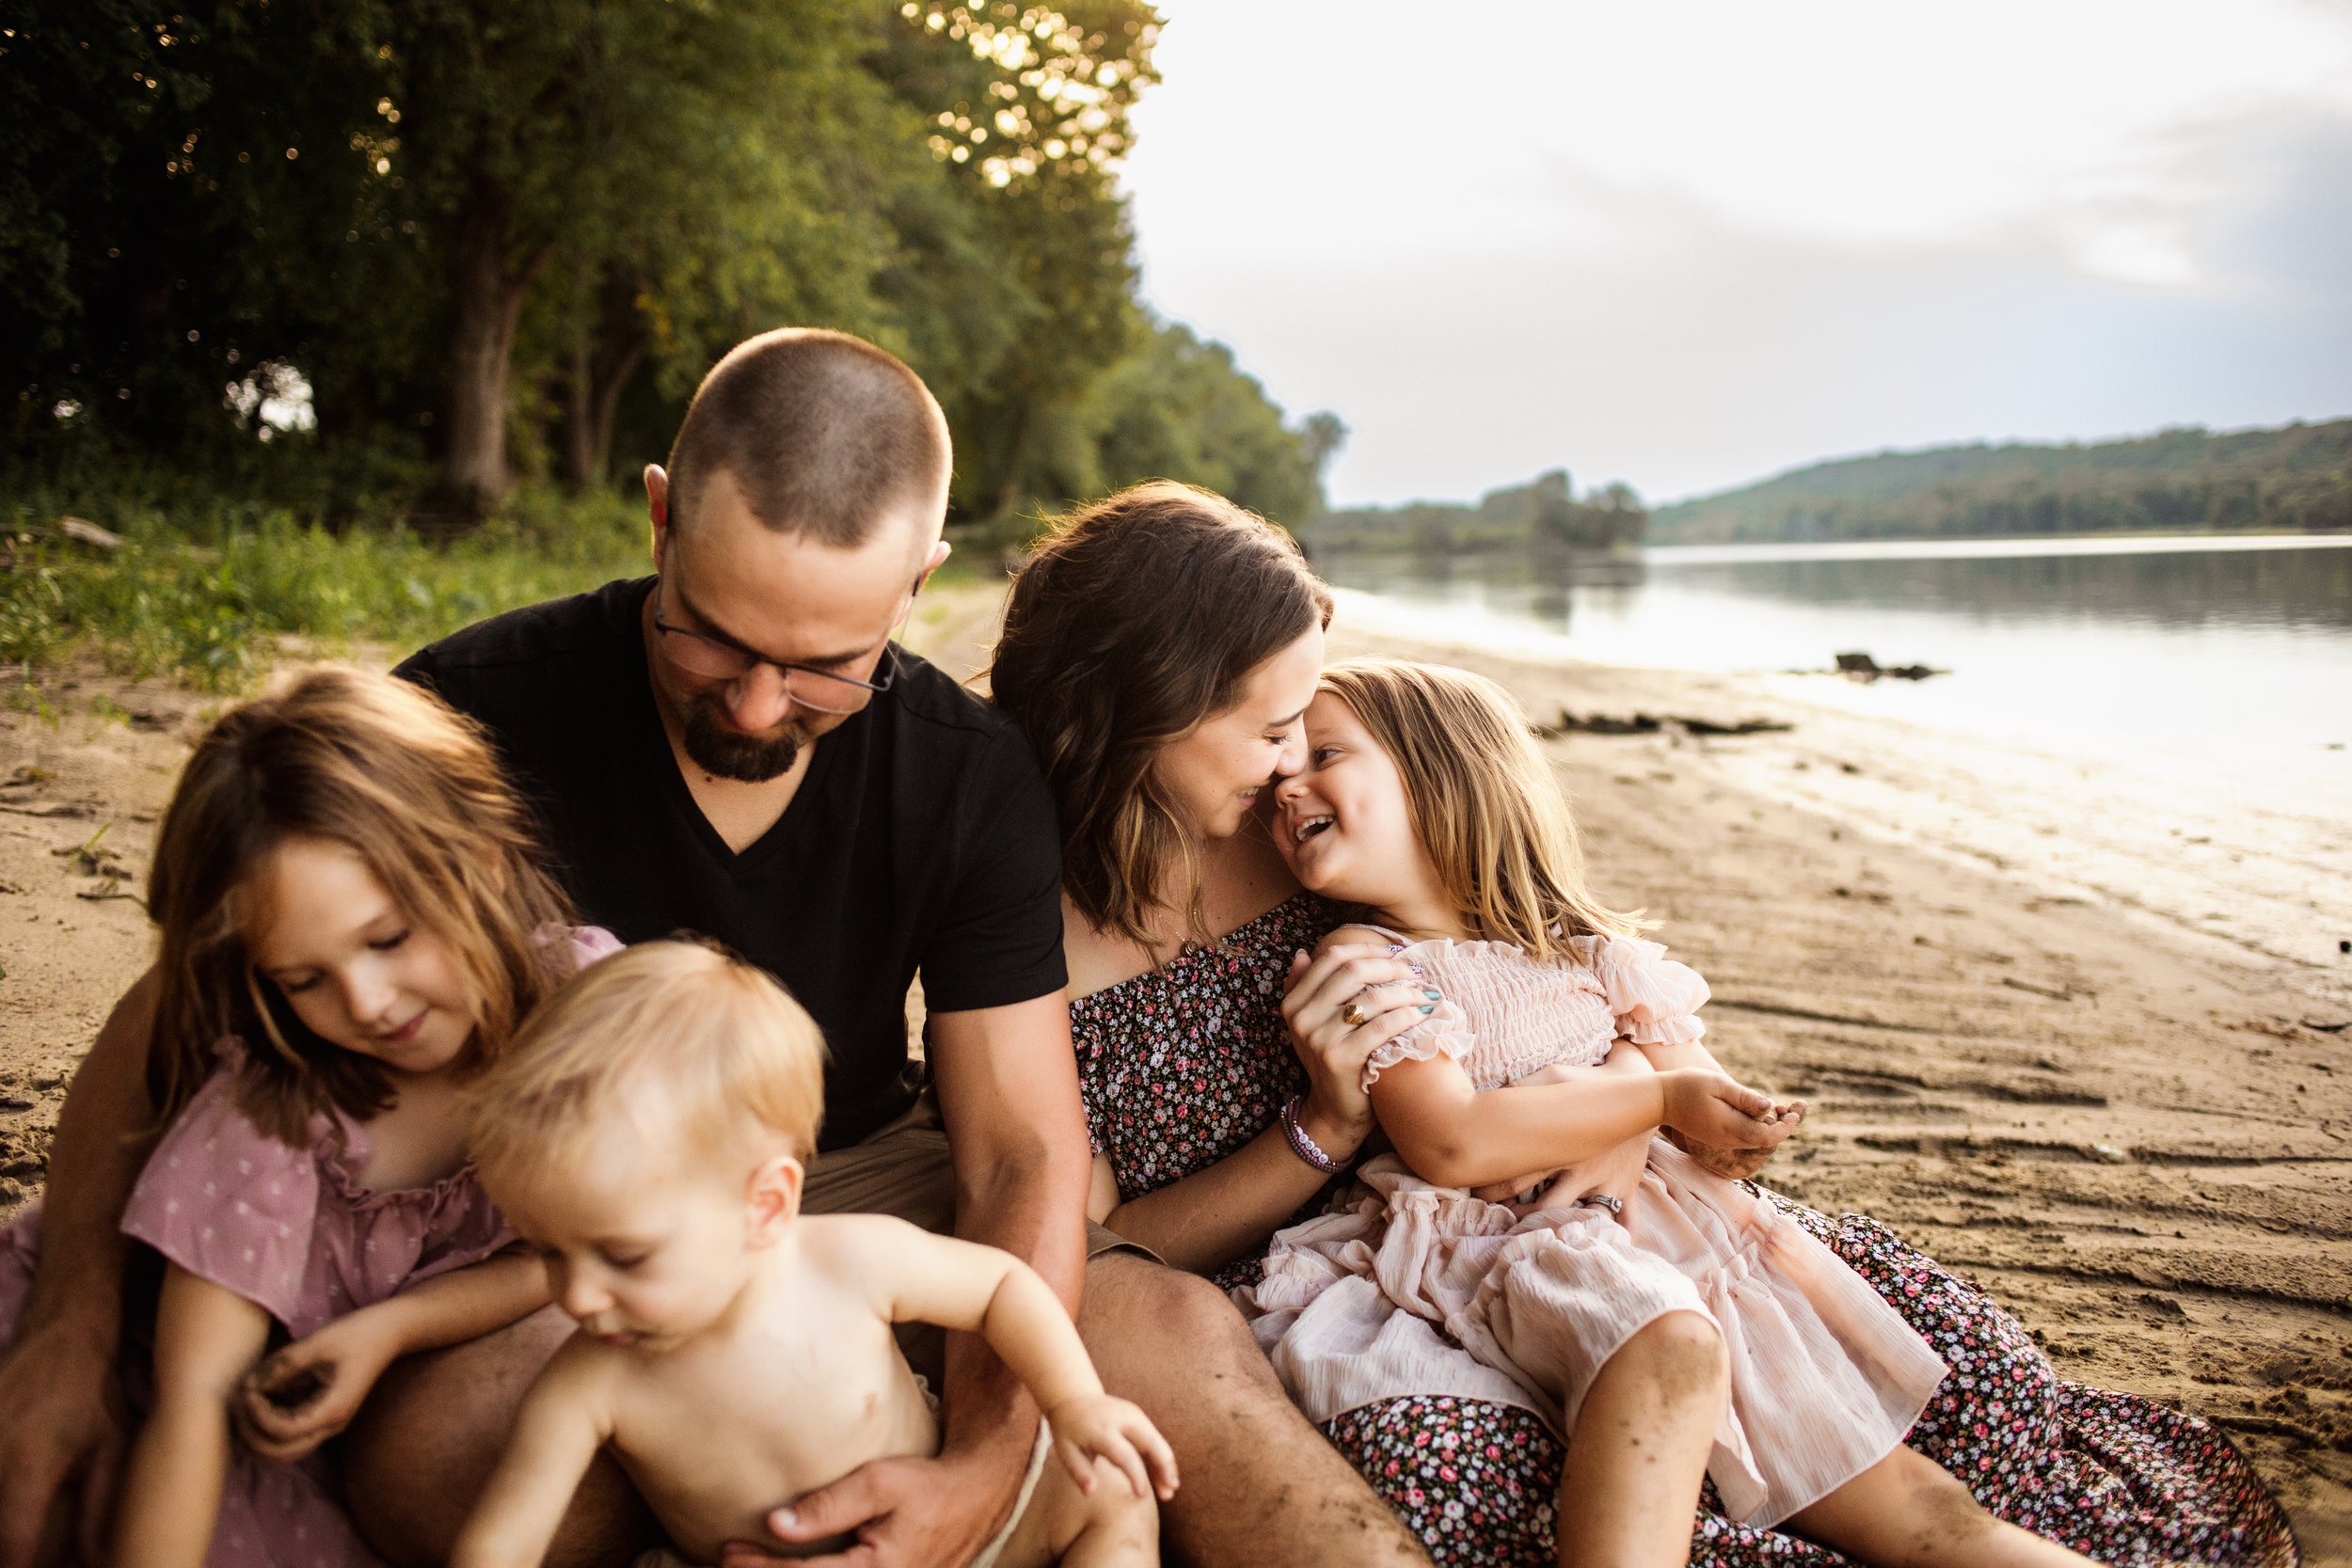  Teala Ward Photography captures an authentic moment with a young family as they play together by the Illinois River. Mother daughter #TealaWardPhotography #TealaWardFamilies #IllinoisRiverPhotography #IllinoisFamilyPhotography #familylifestylepics 